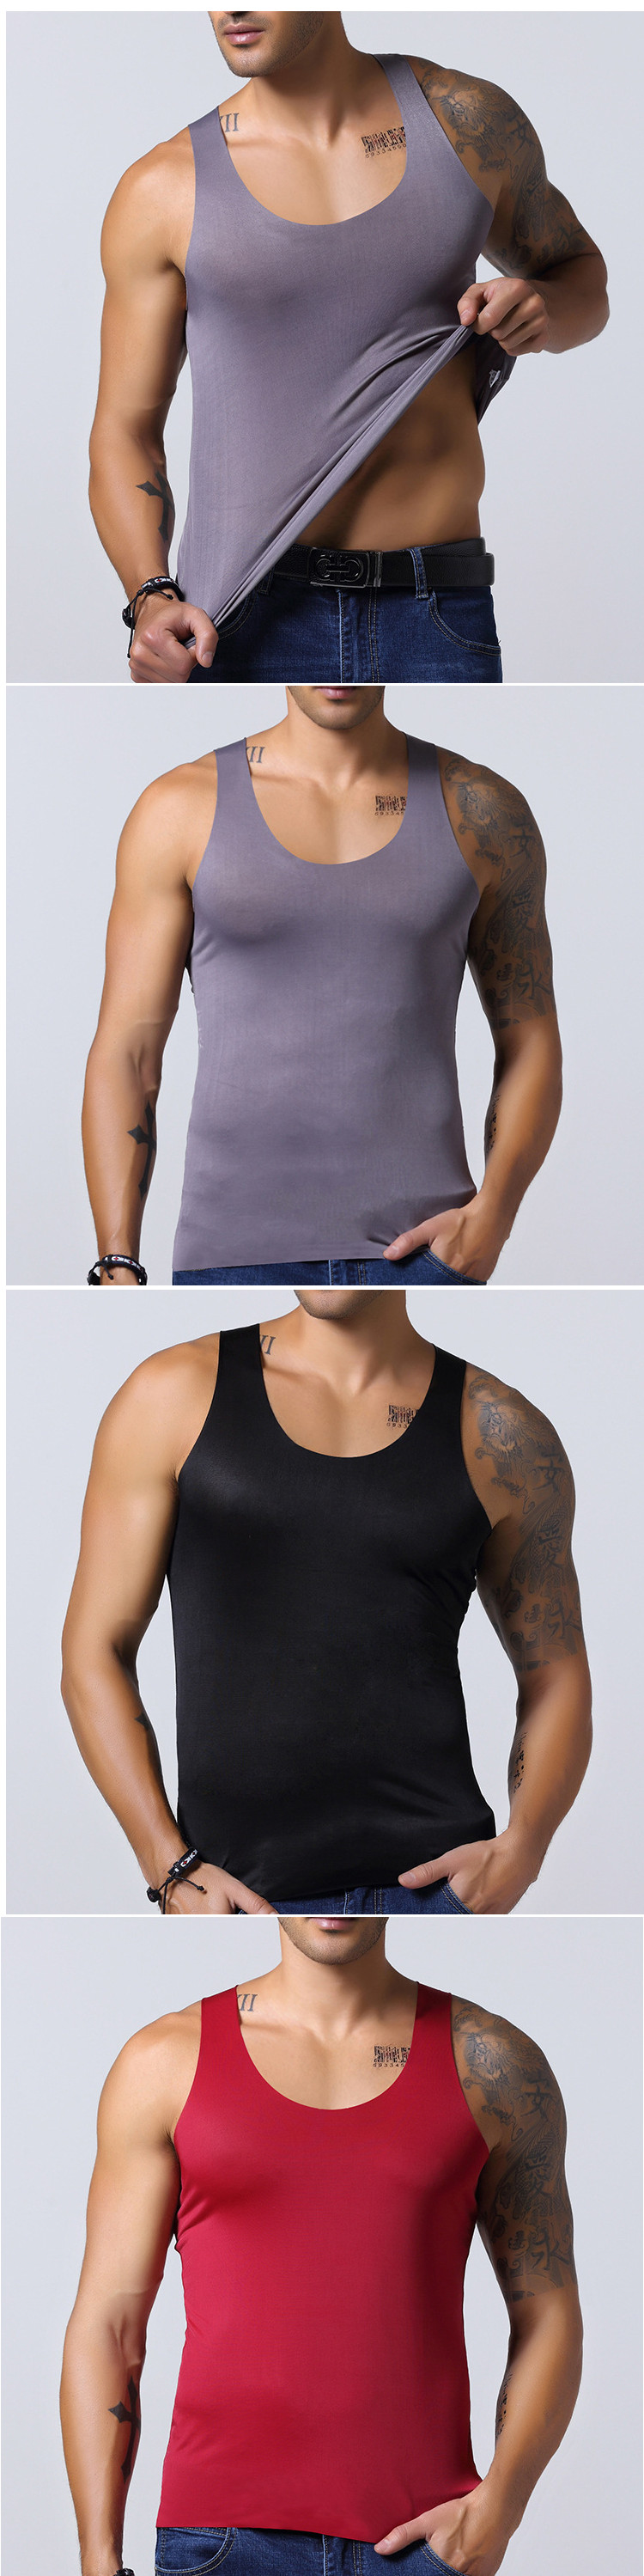 Mens-Seamless-Ice-Silk-Vest-Leisure-Solid-Color-Thin-Elastic-Fitness-Sports-Tanks-Tops-1177653